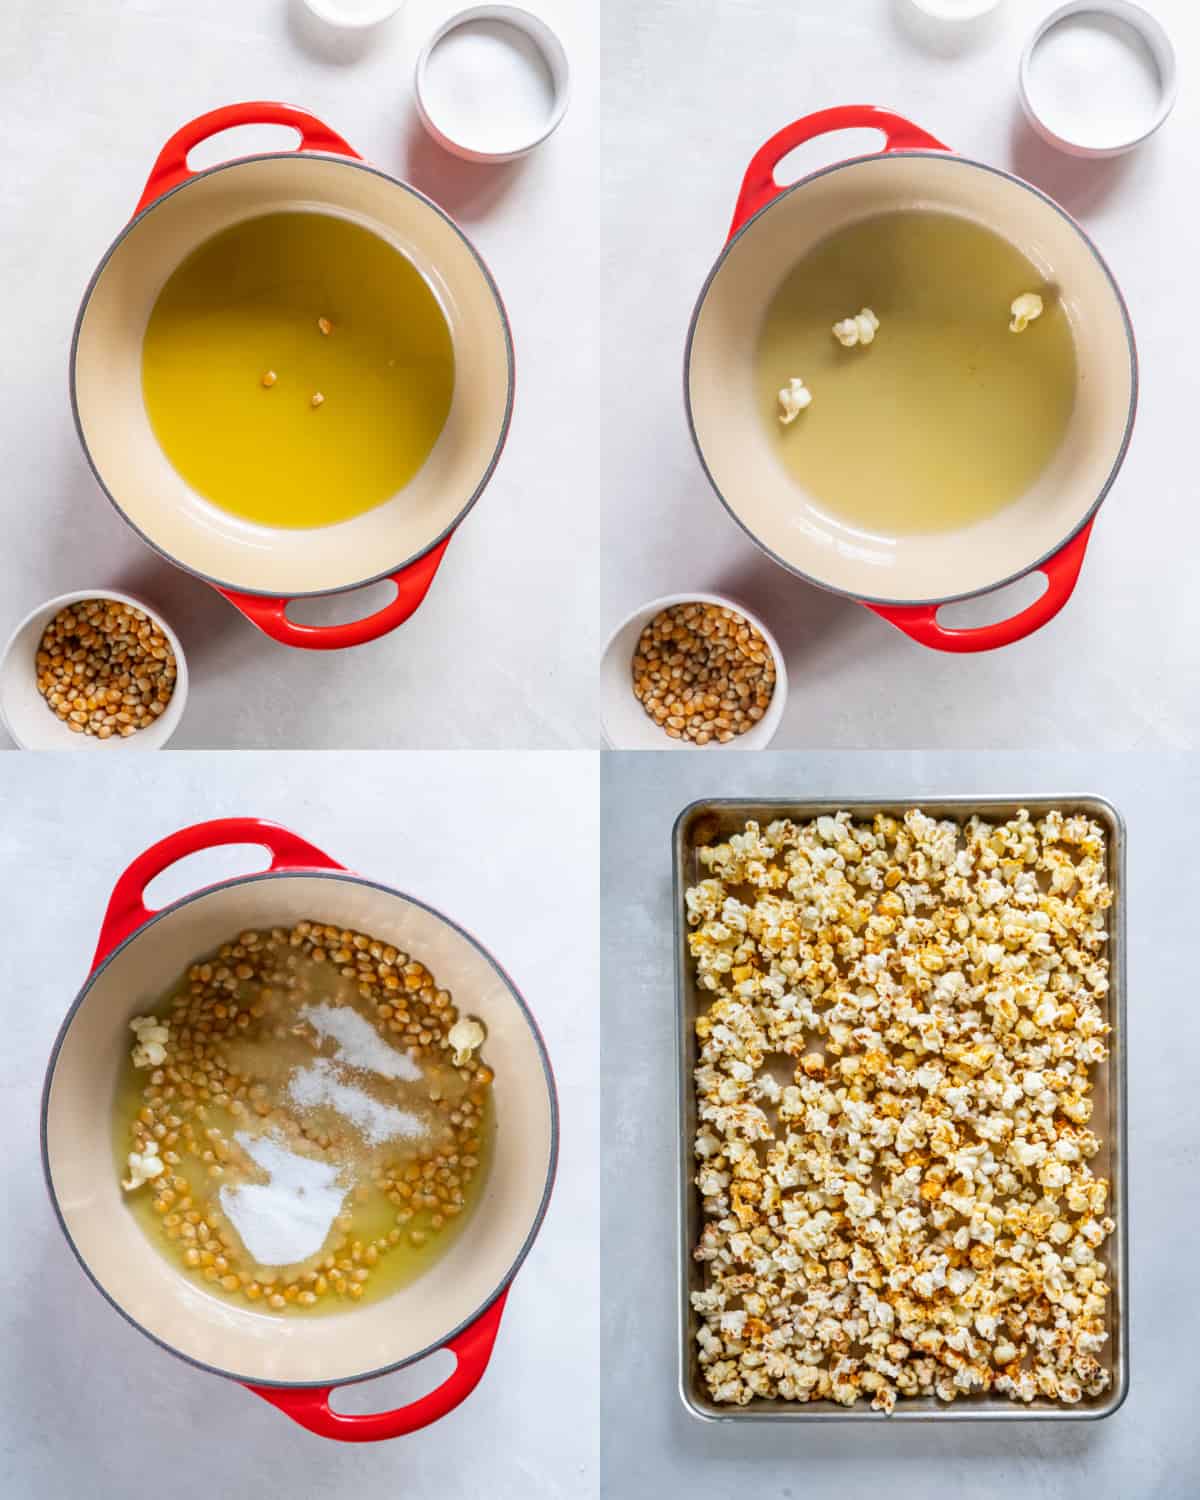 Heating oil in a pan with three popcorn kernels. Then adding the rest of the kernels to the hot pan after the 3 kernels pop.